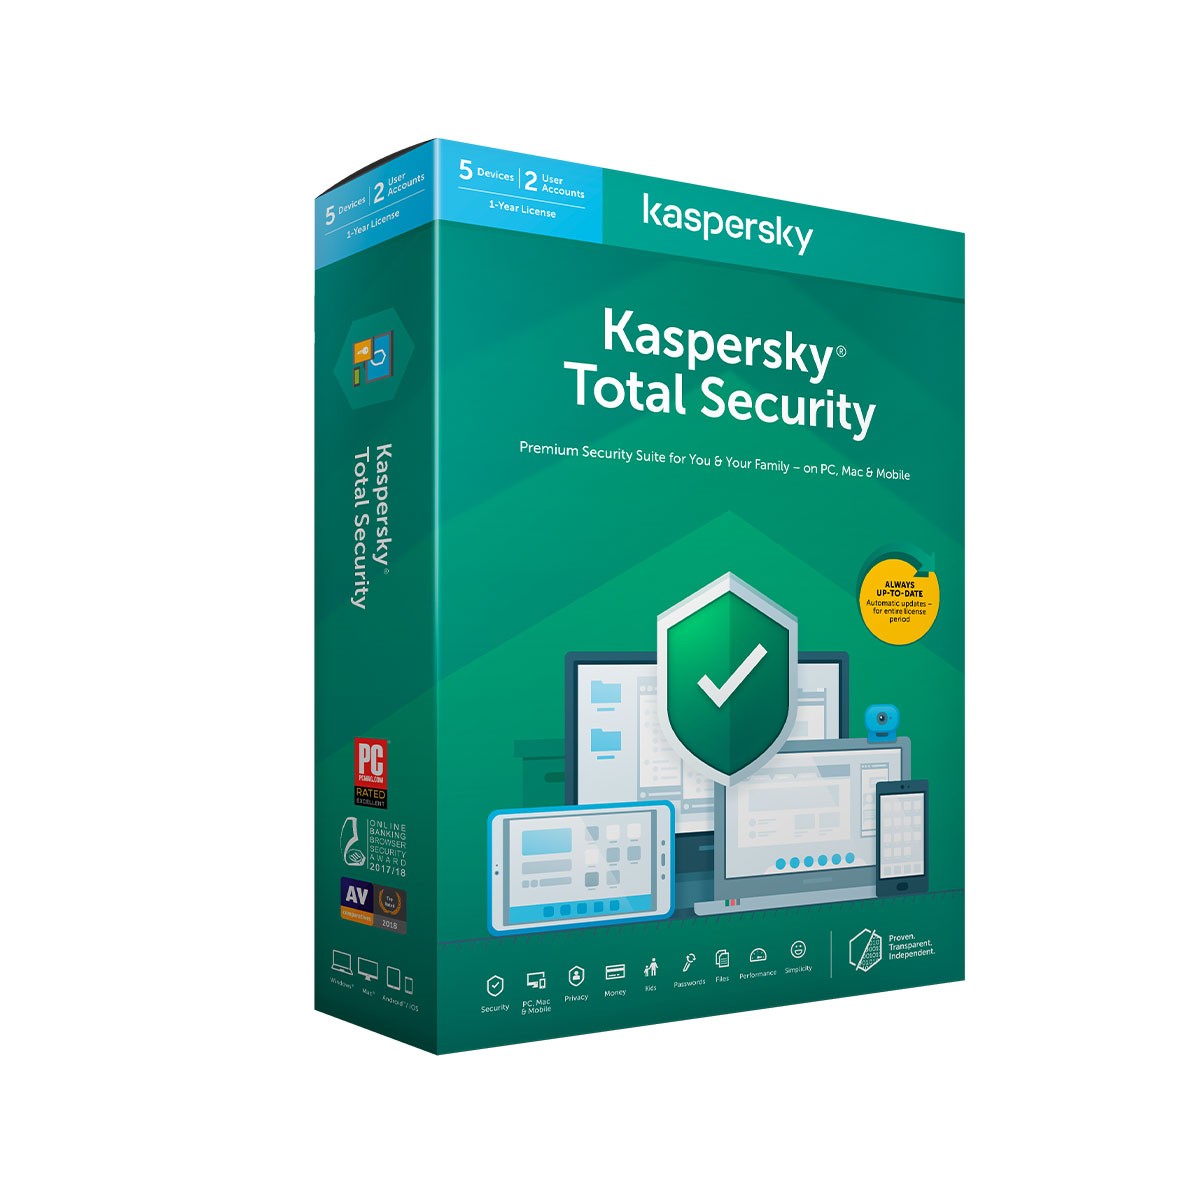 Kaspersky Total Security Software 2020 3 Users / 1 Year